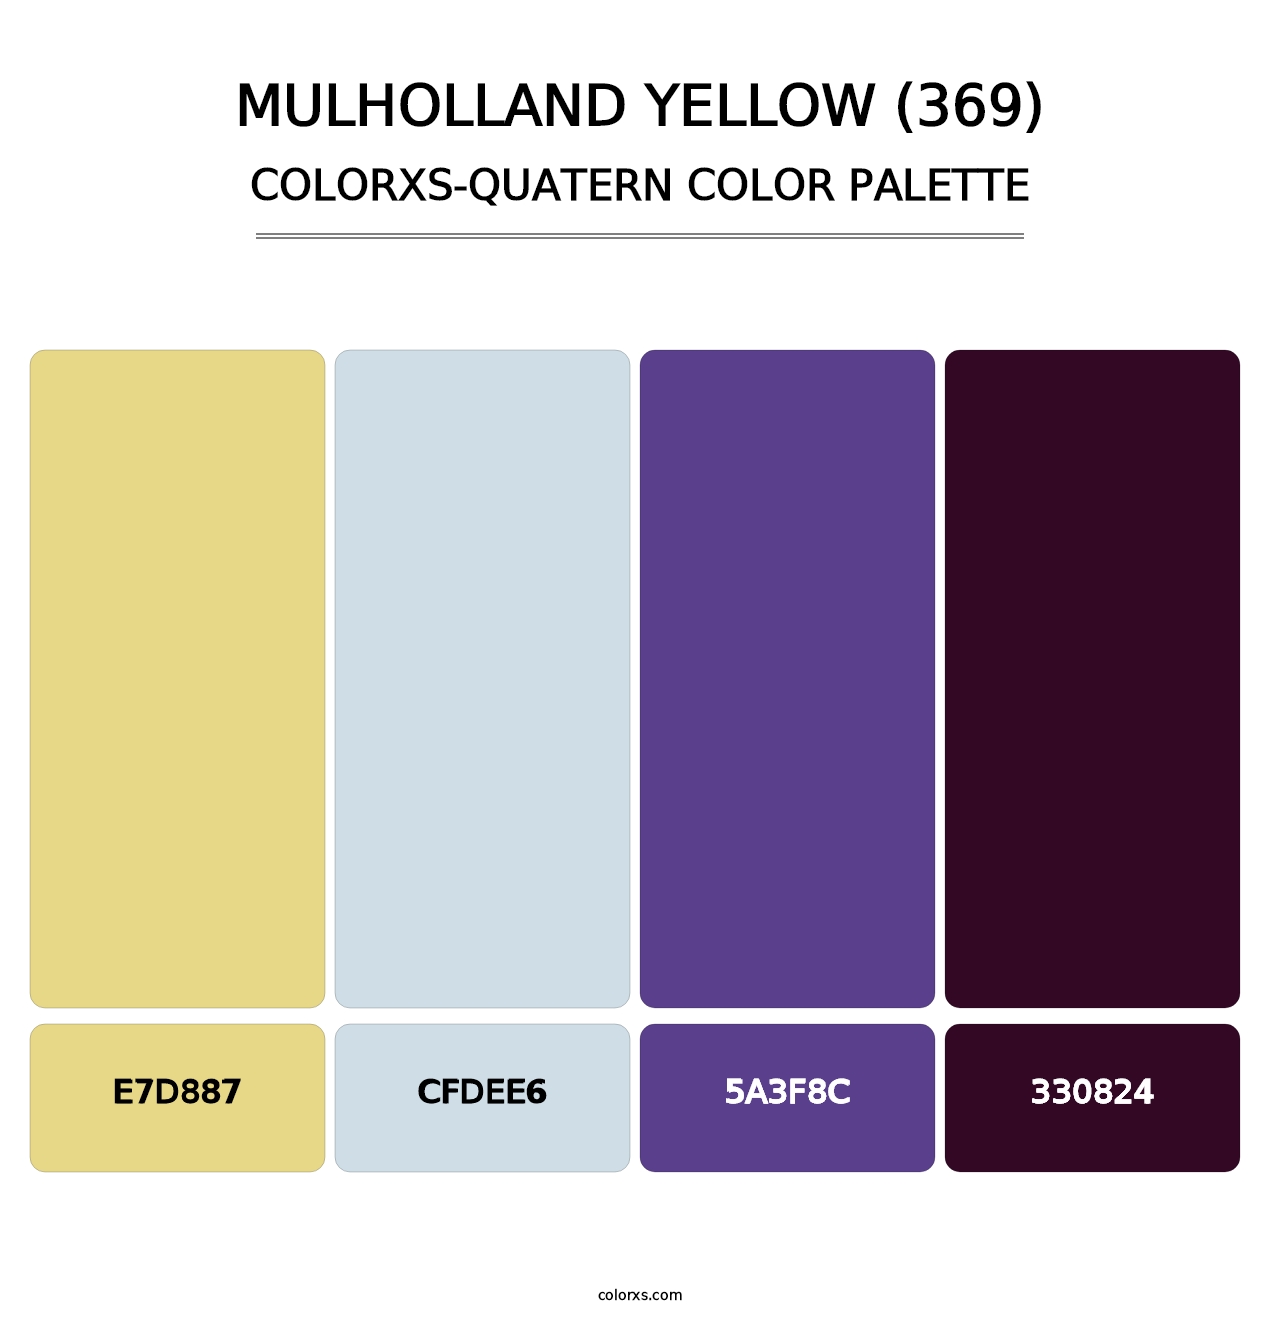 Mulholland Yellow (369) - Colorxs Quatern Palette